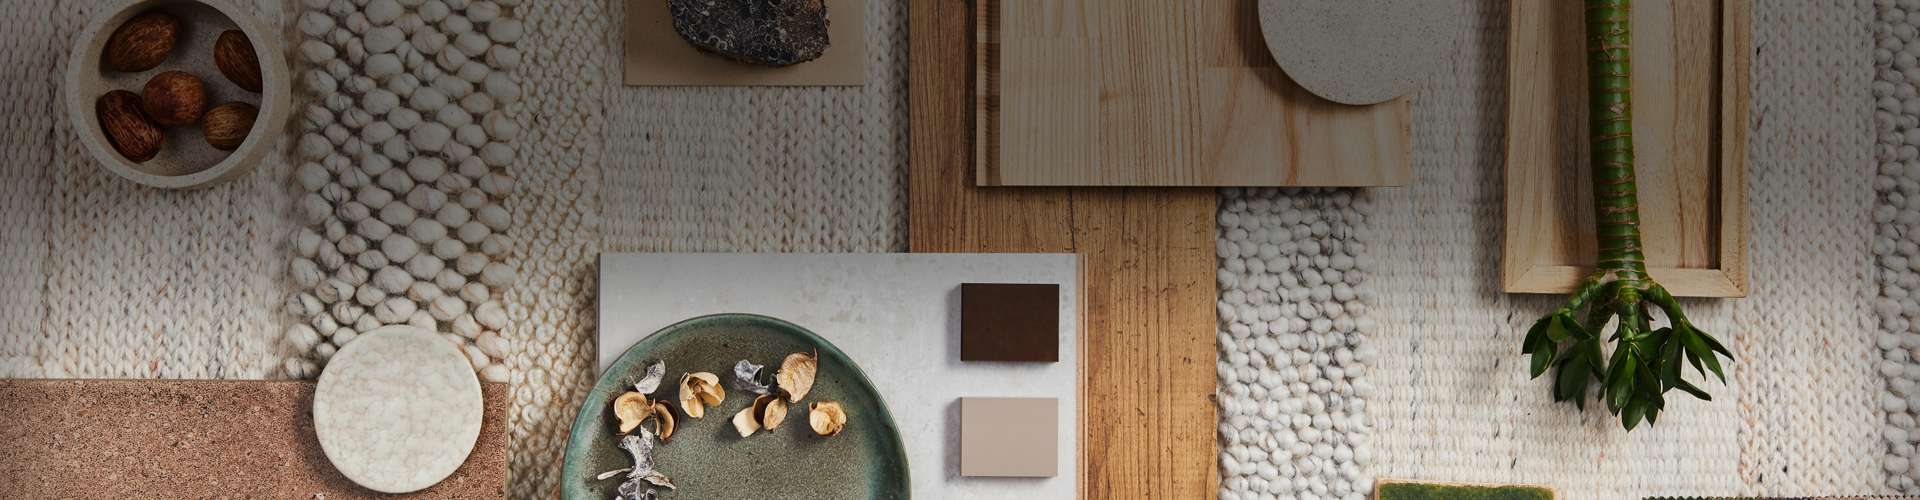 Flat lay design of creative architect moodboard composition with samples of building, beige textile and natural materials and personal accessories.